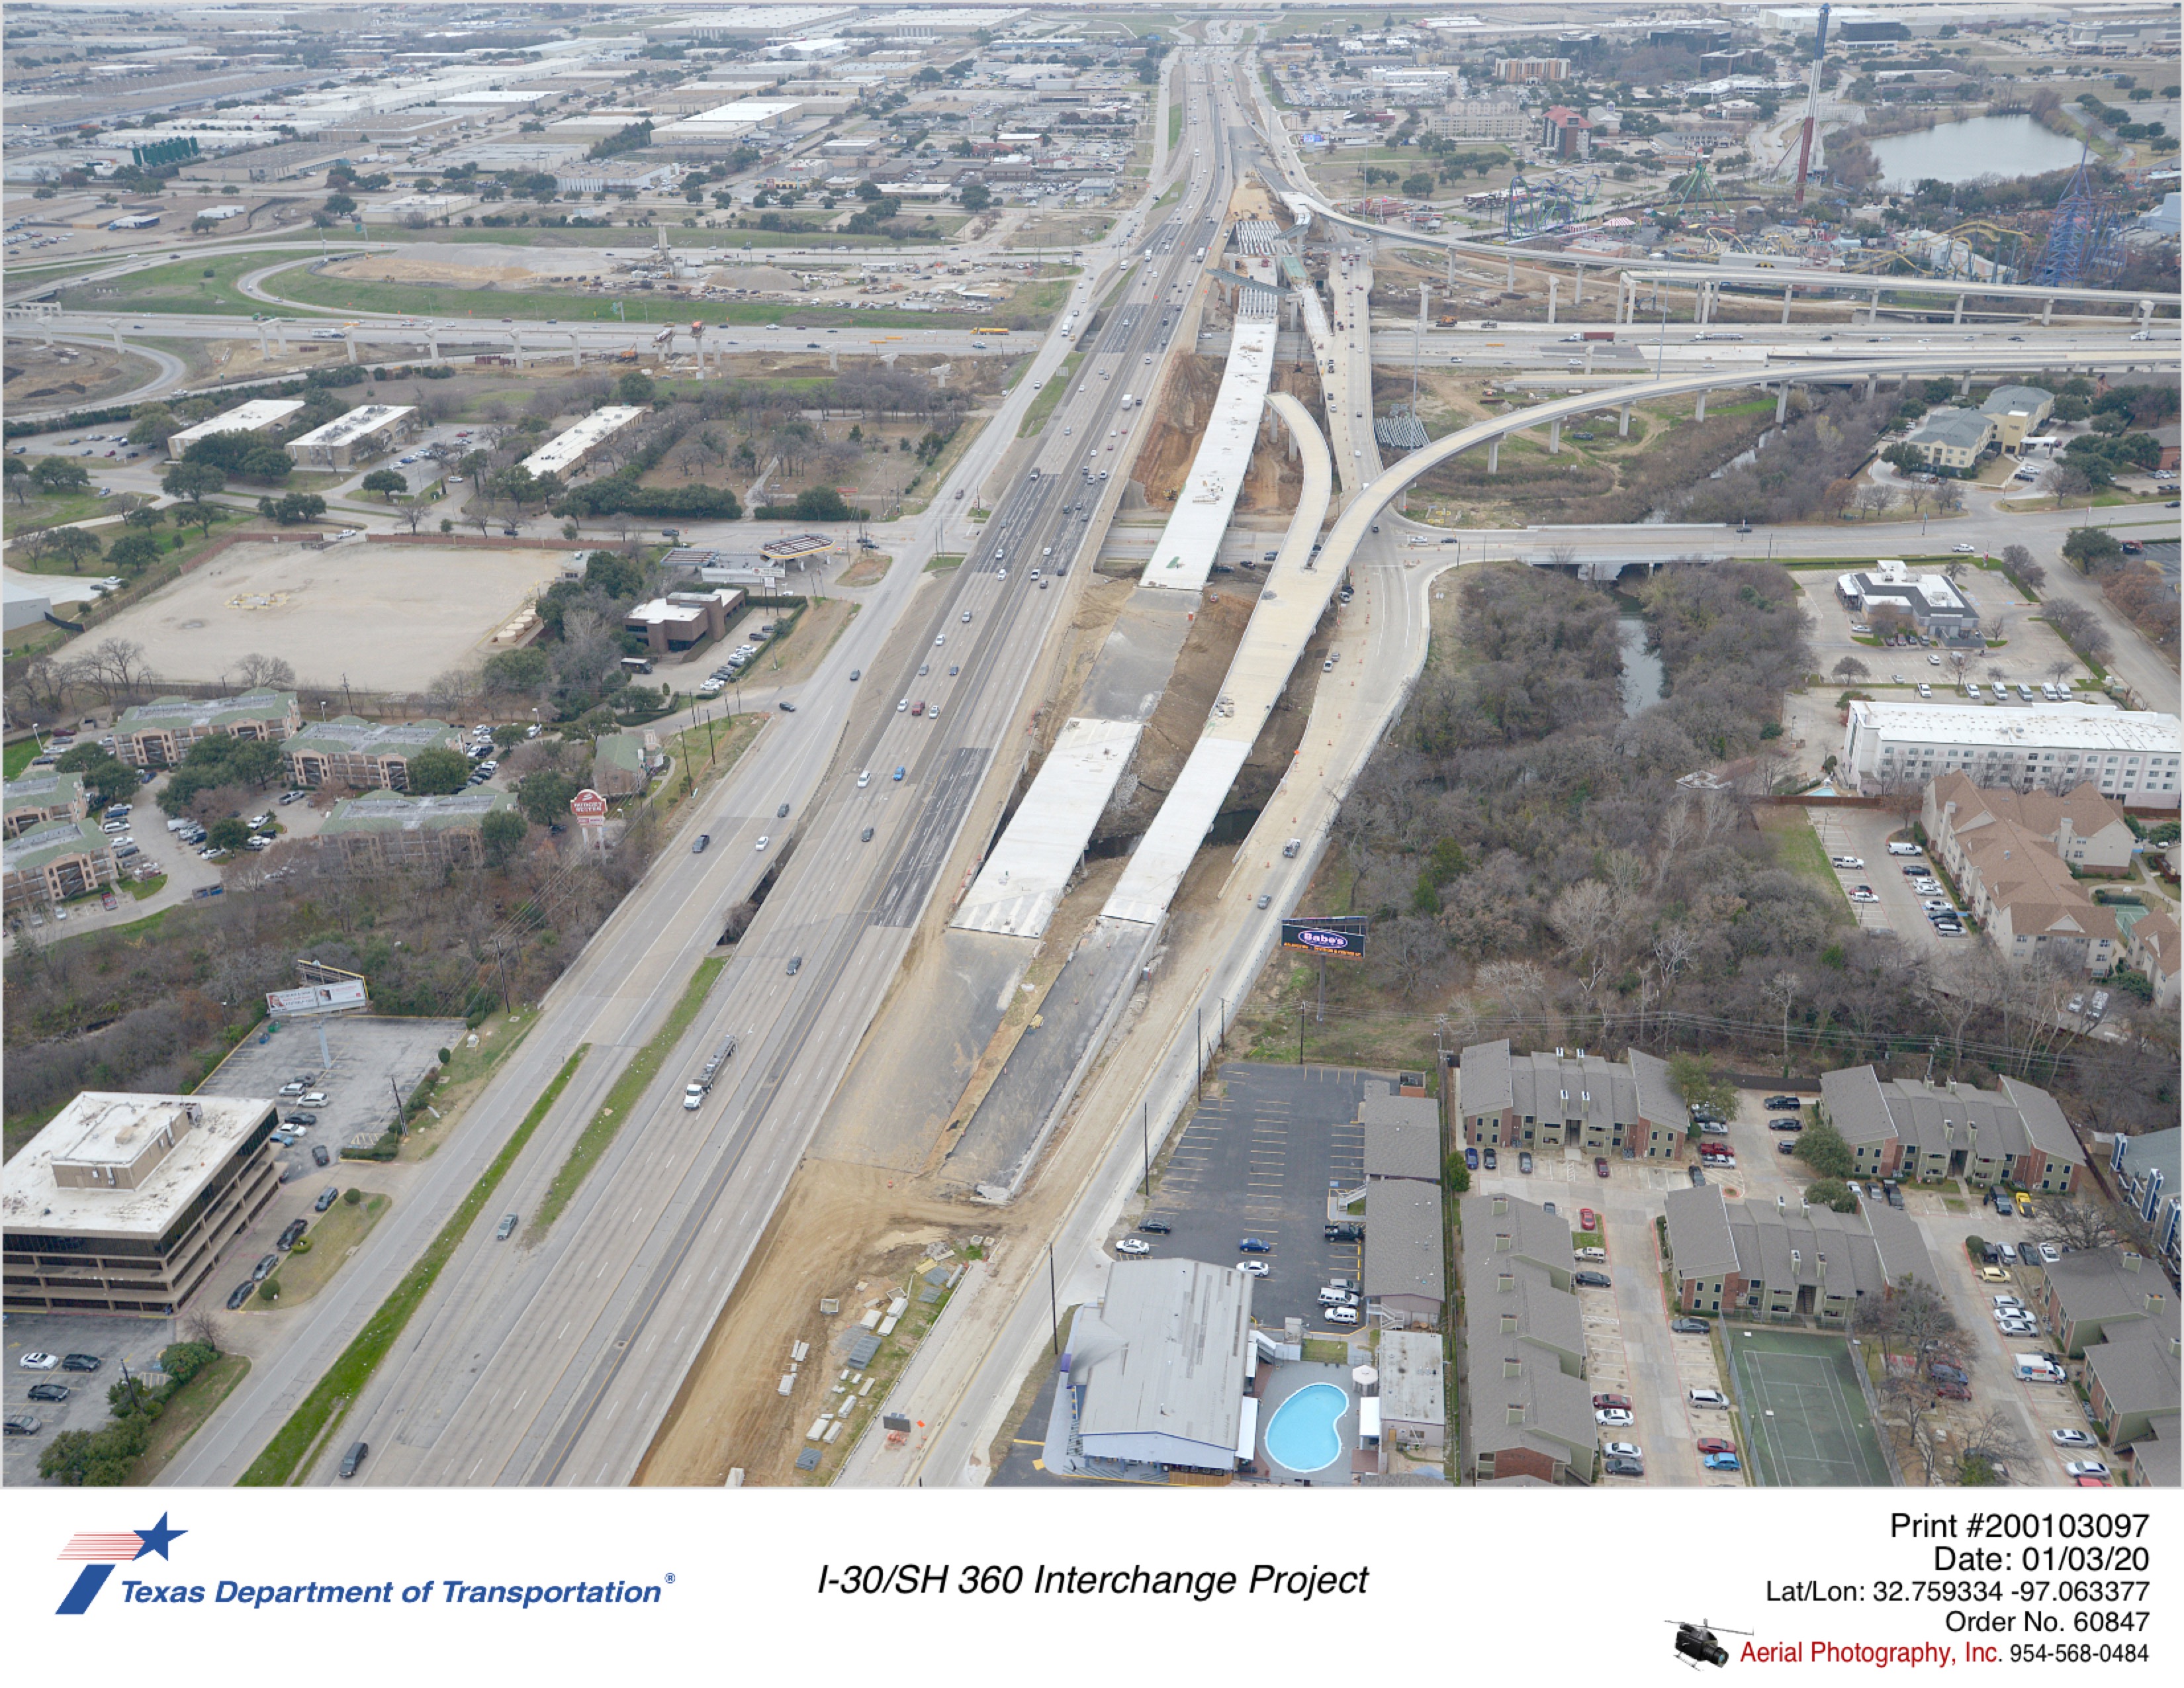 SH 360 looking south with I-30 crossing in background. Construction shows work on SH 360 southbound mainlane bridge.